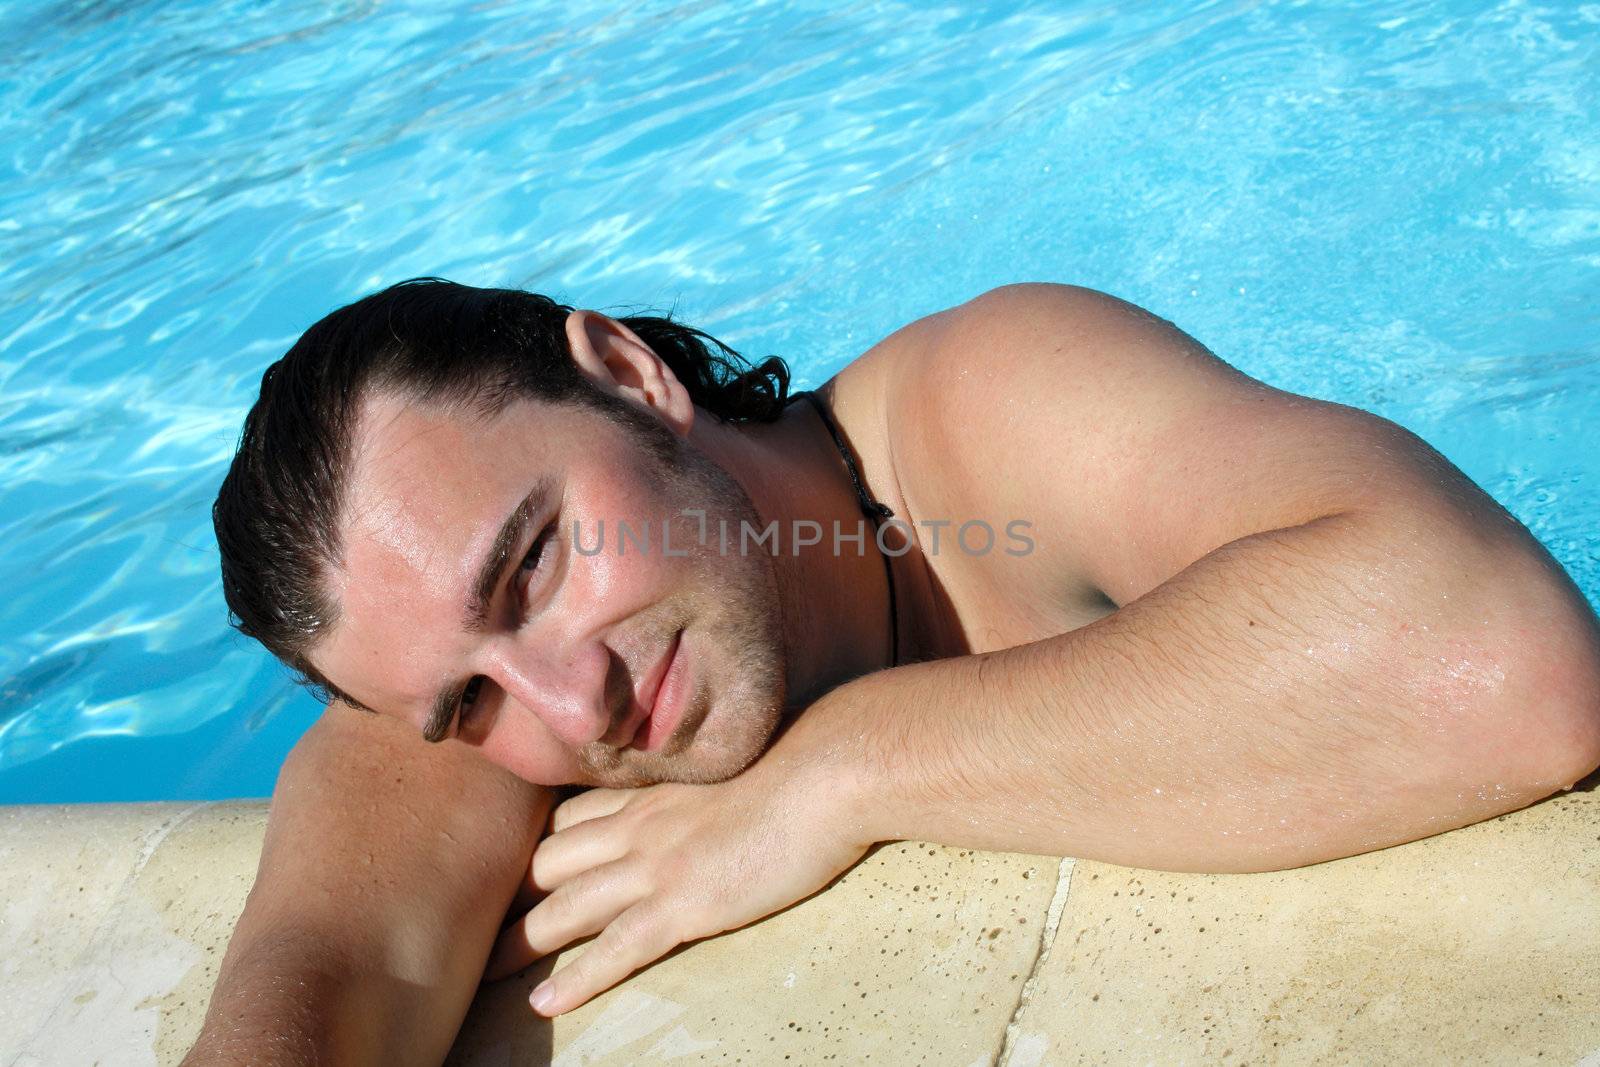 posing in the swimming pool for the photographer